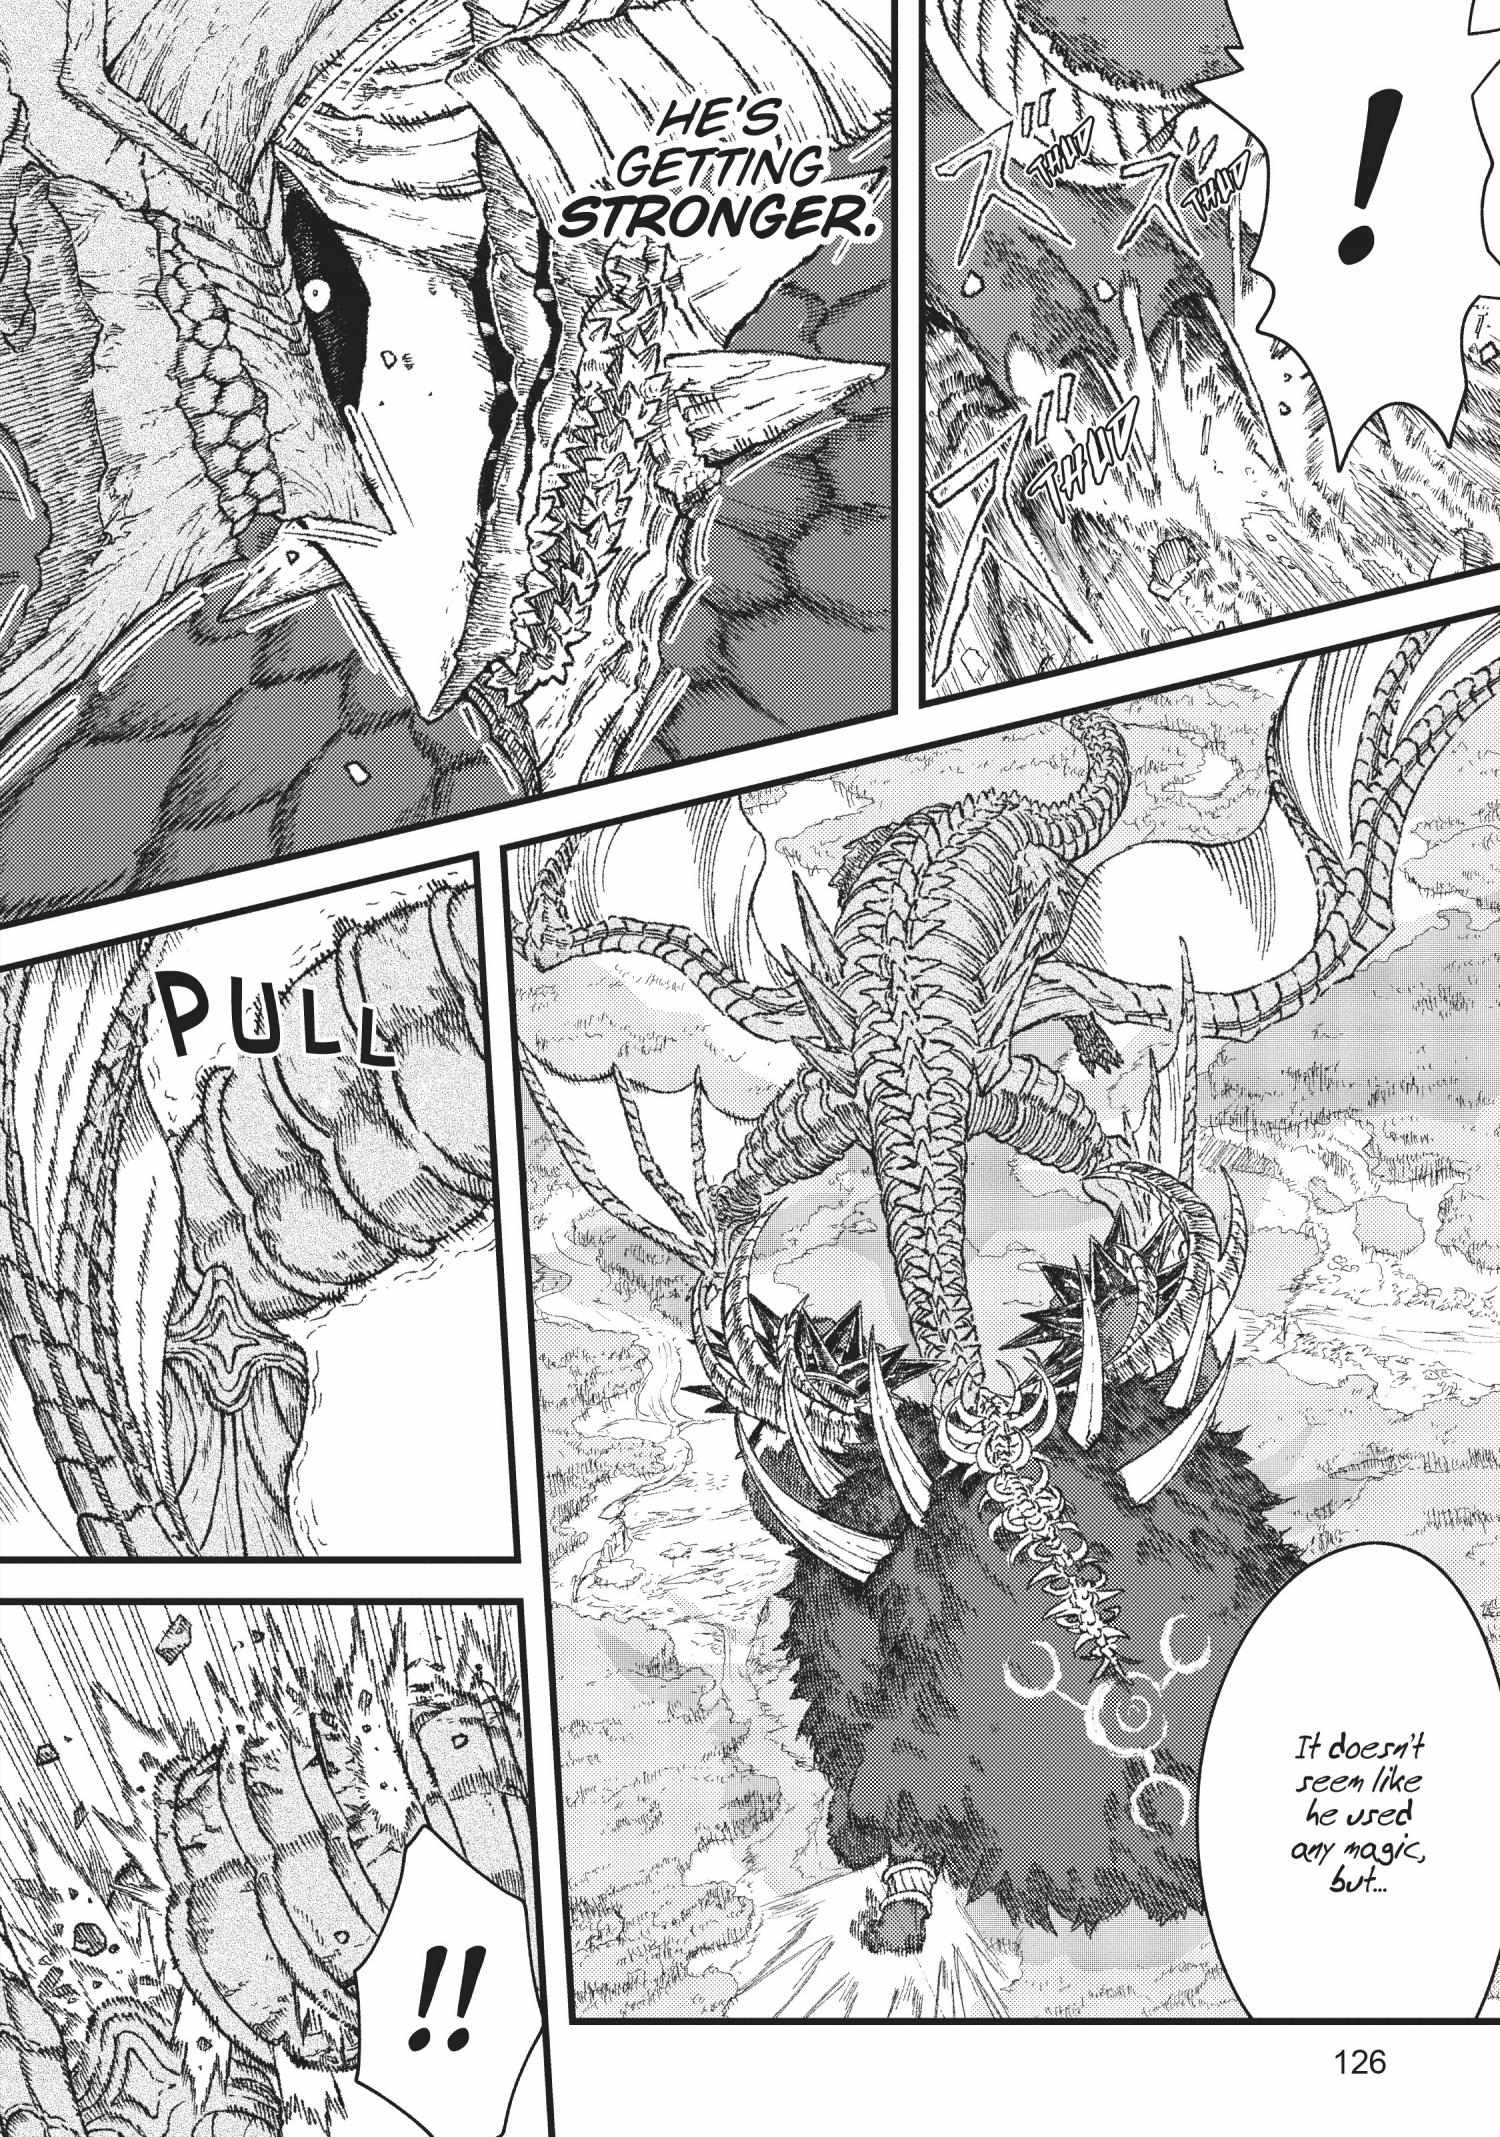 The Comeback Of The Demon King Who Formed A Demon's Guild After Being Vanquished By The Hero - 43 page 2-85f6e350